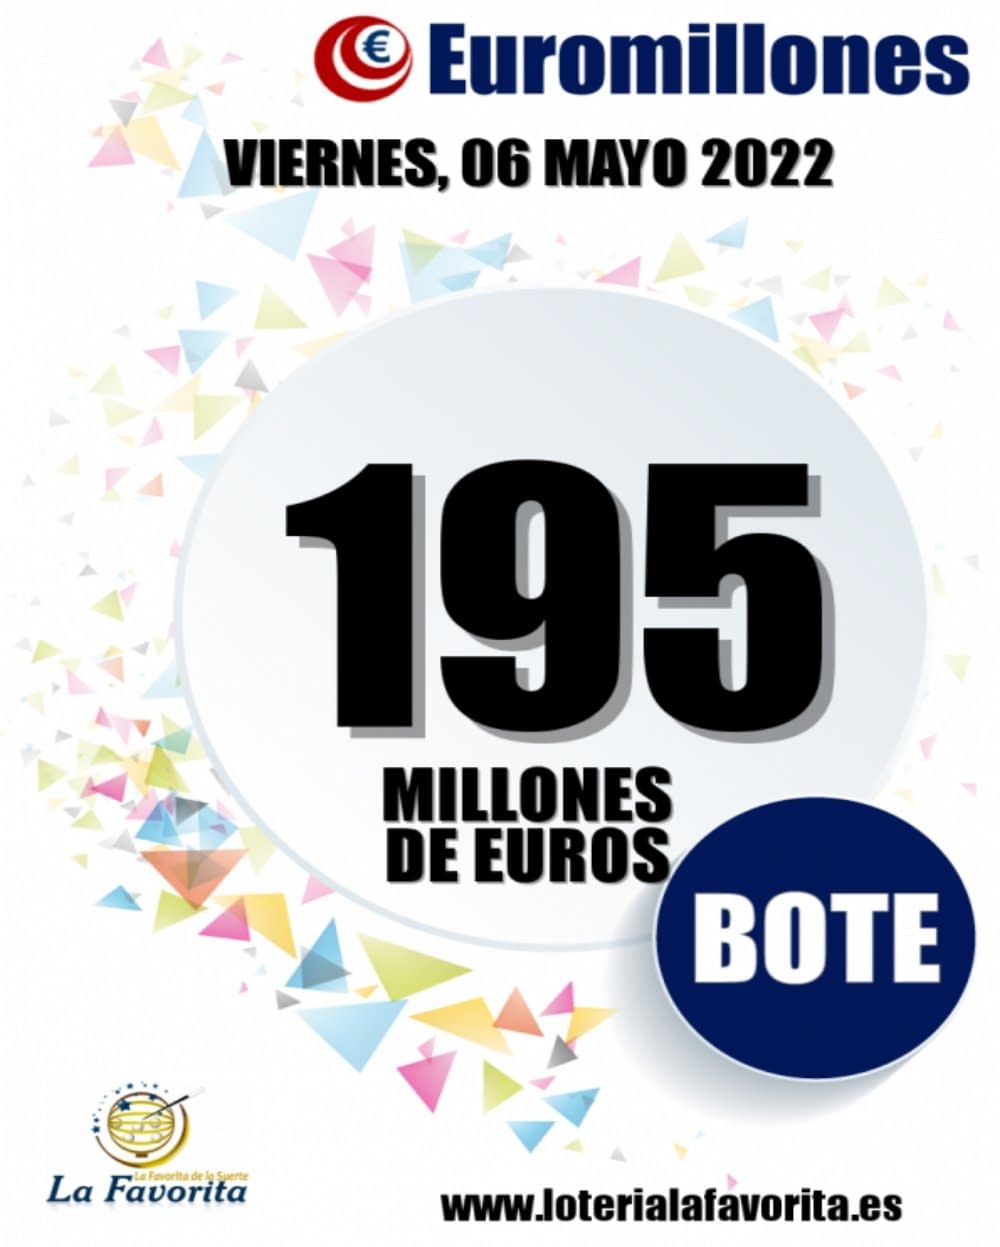 Bote Euromillones